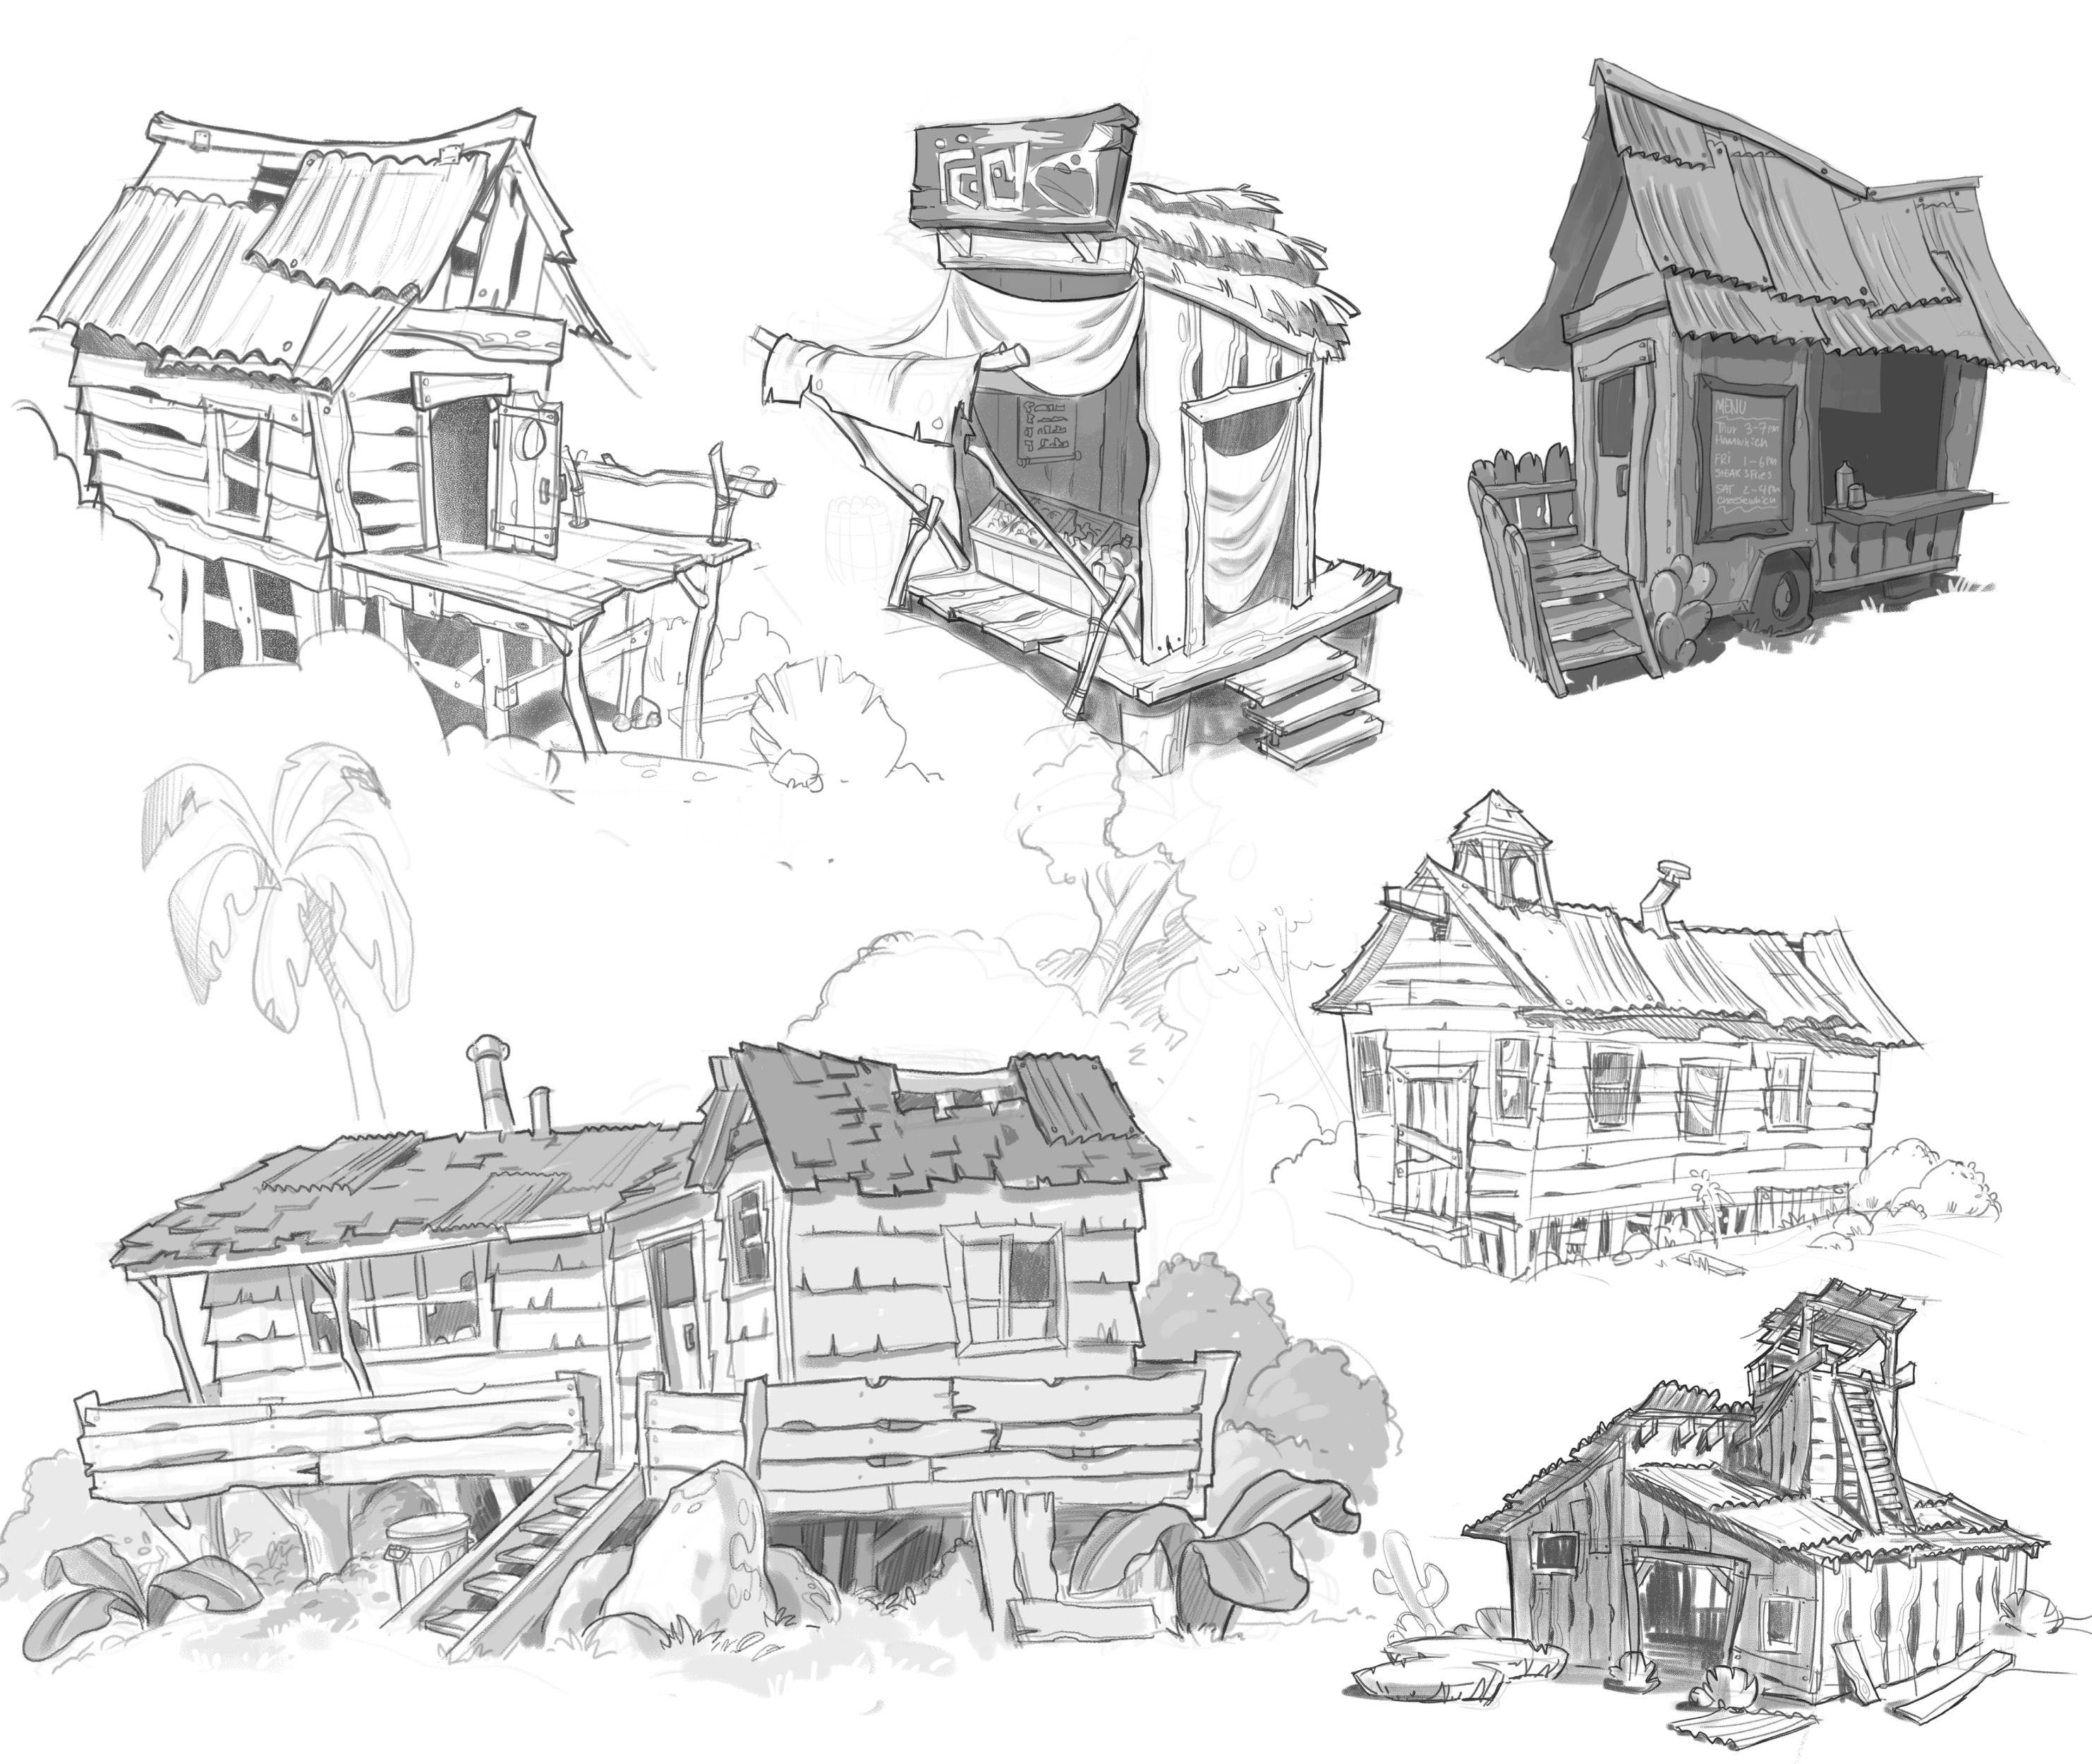 Sketches of dilapidated buildings